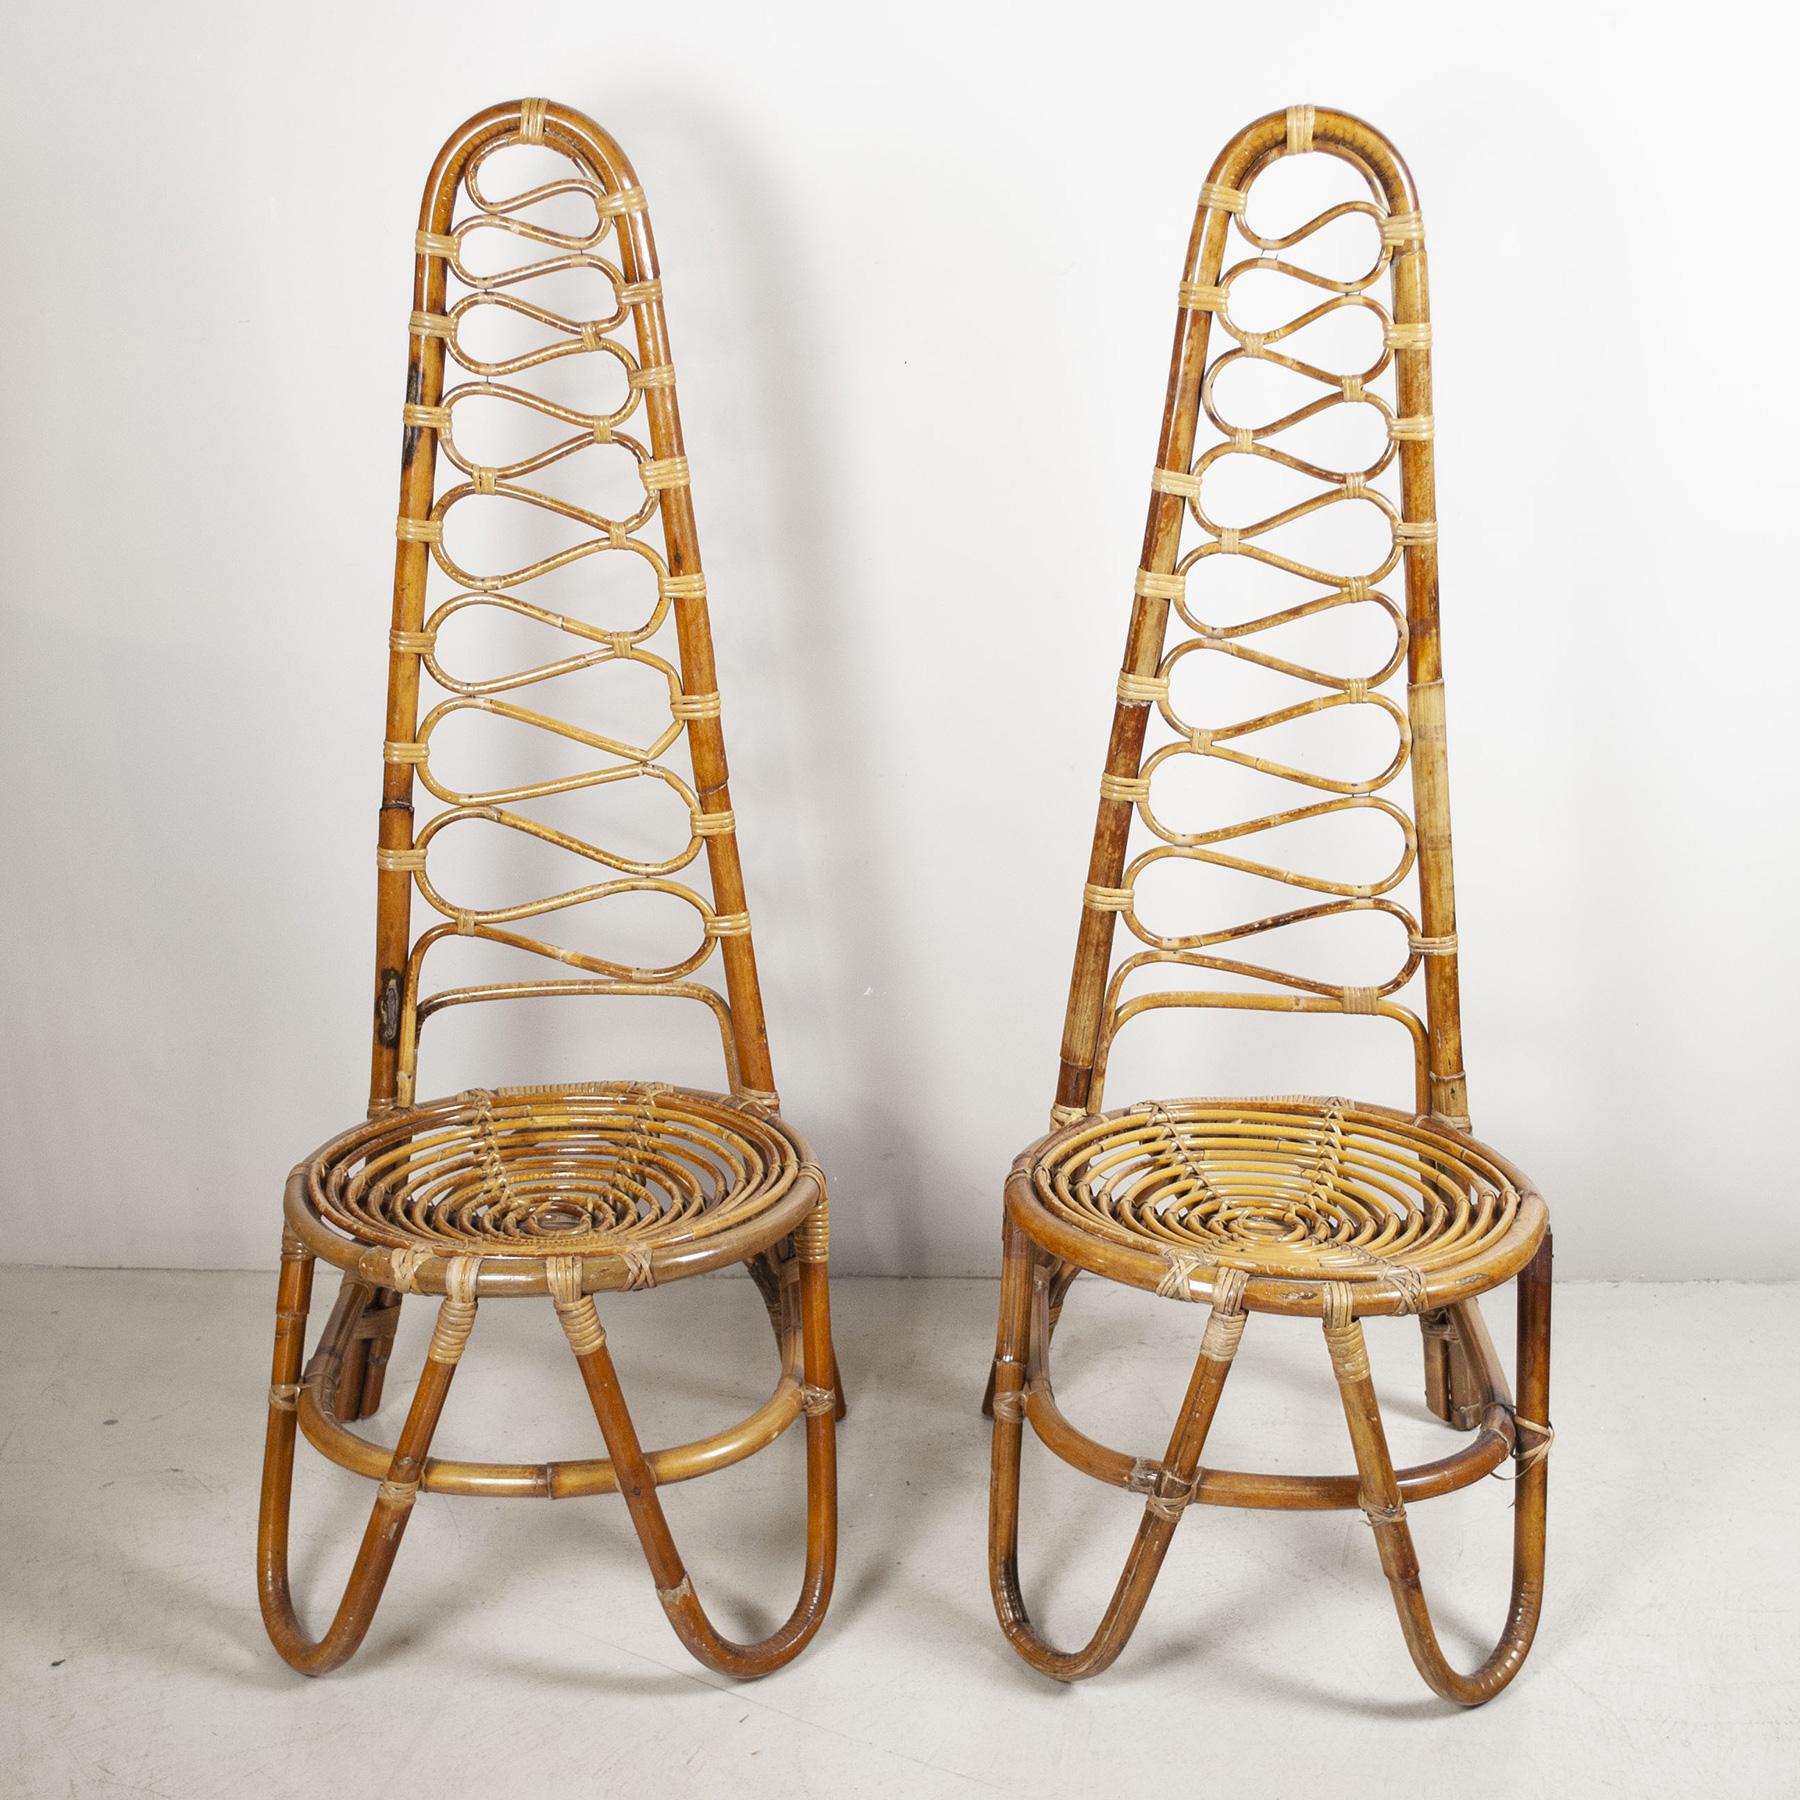 Set of two fireplace chairs production Bonacina 60s.
In Lurago d'Erba Giovanni treasured the art of the ancient craft of basket weaving and, more than a century ago, founded his company, soon expanding its production to include armchairs, lounges